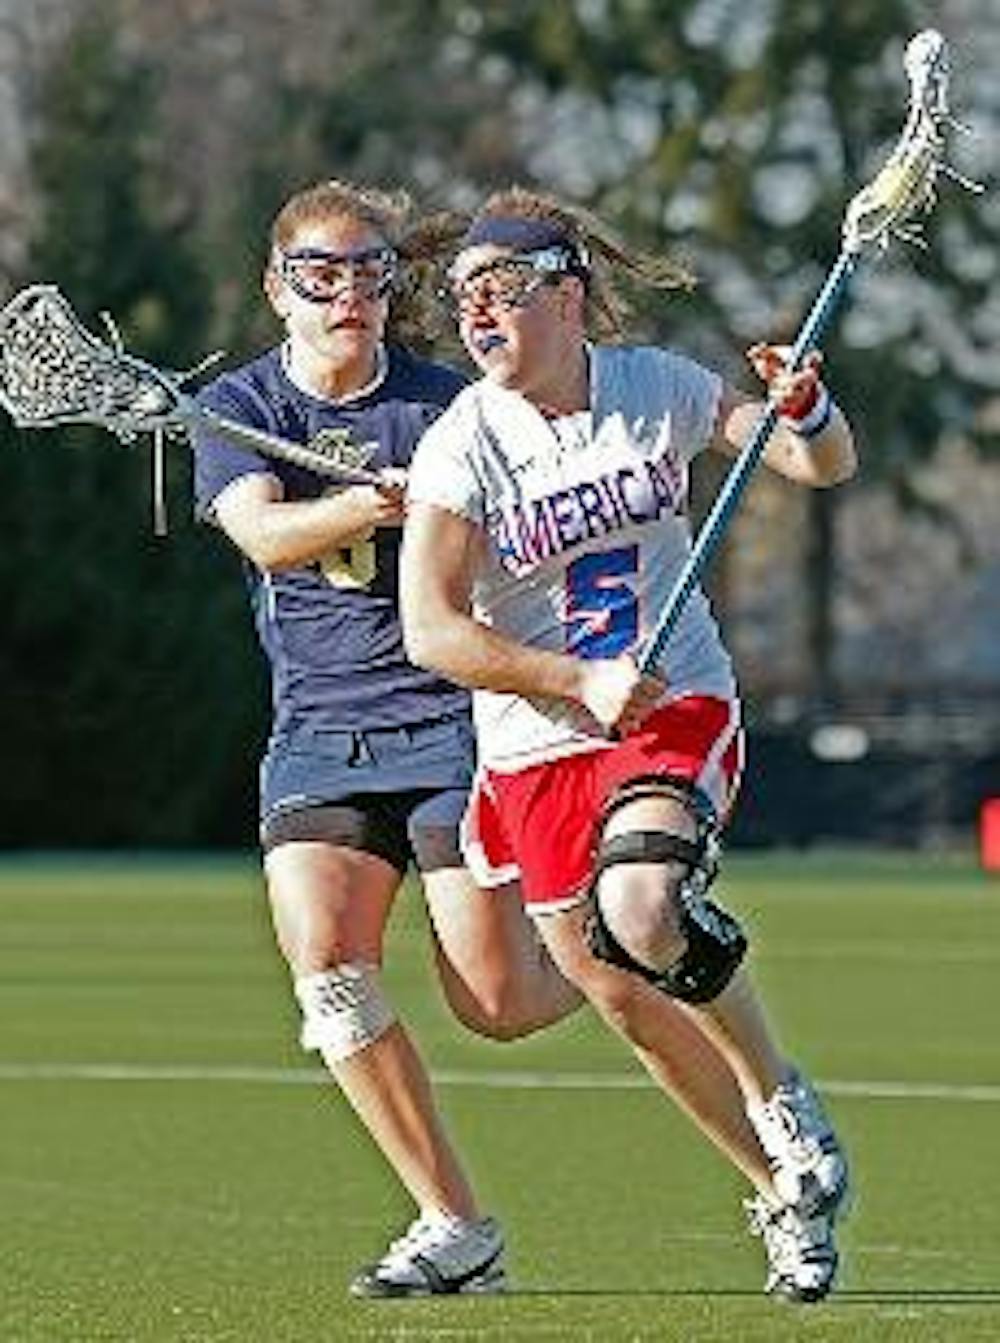 EAGLES FALL AGAIN - In this file photo, senior Leslie Fischer races up the field against George Washington University. She was the star player of American's 16-12 loss to their Patriot League rivals Holy Cross. Fischer scored a team high three goals on th